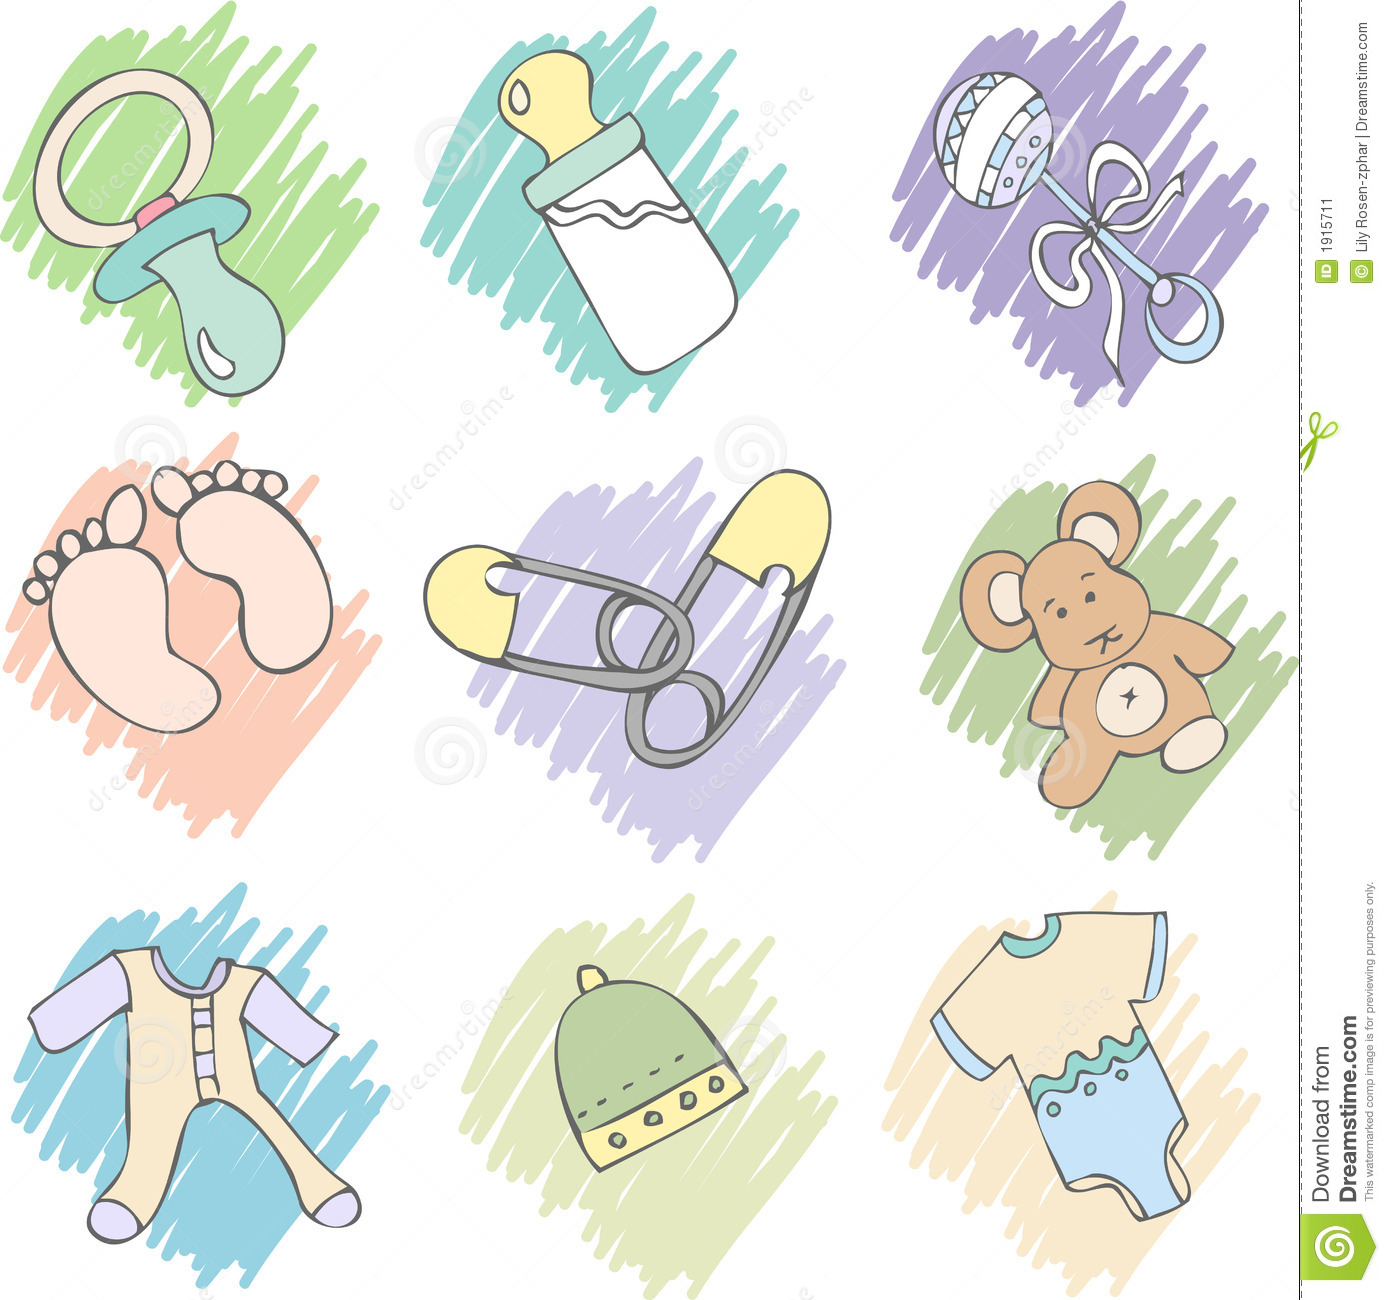 Baby Items Stock Image   Image  1915711